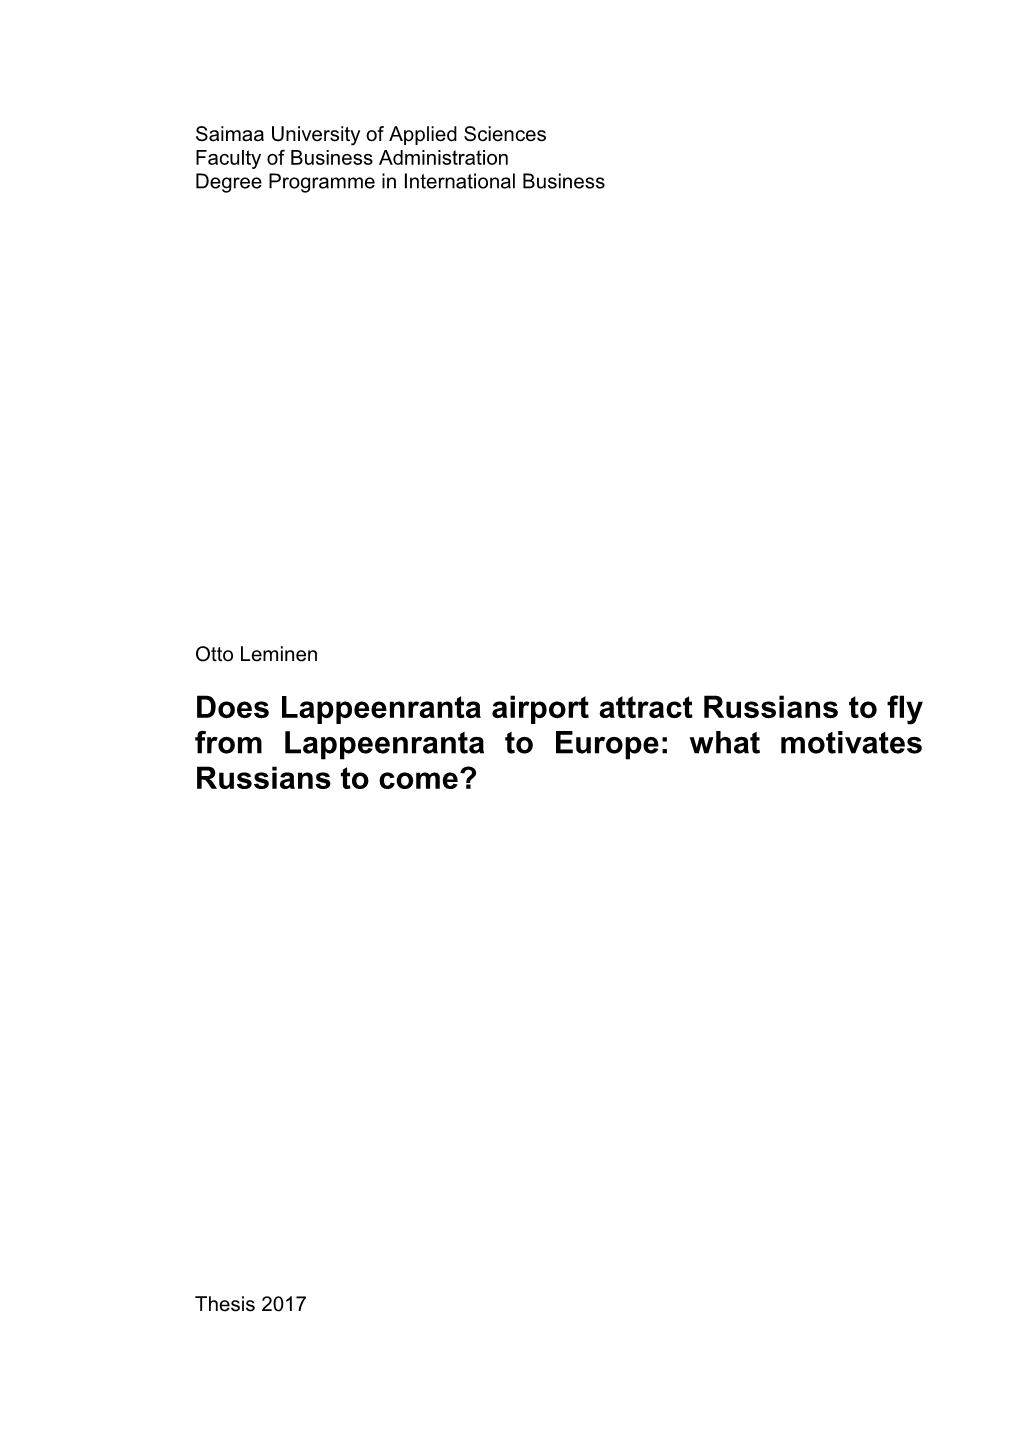 Does Lappeenranta Airport Attract Russians to Fly from Lappeenranta to Europe: What Motivates Russians to Come?